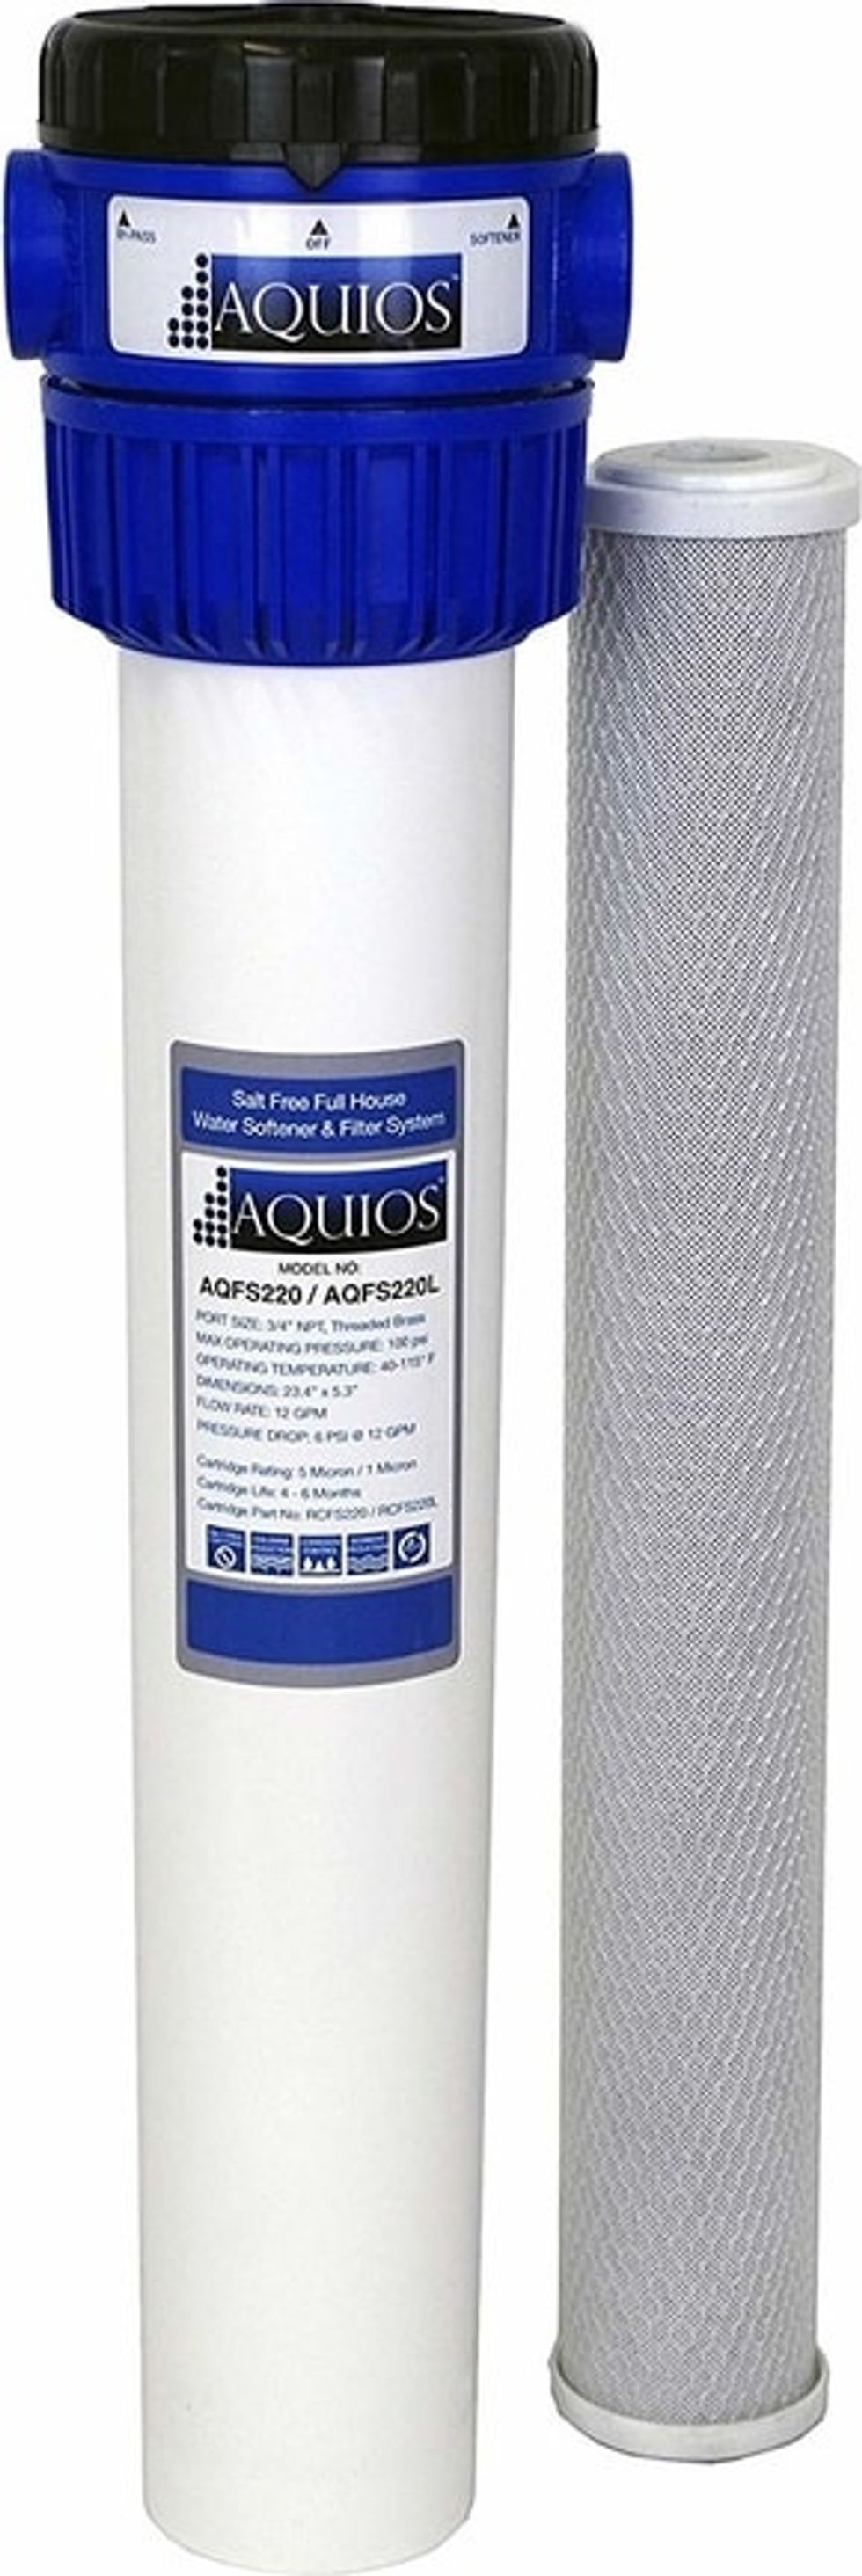 Aquios AQFS220 Salt-Free Water Softener and Filter System Review